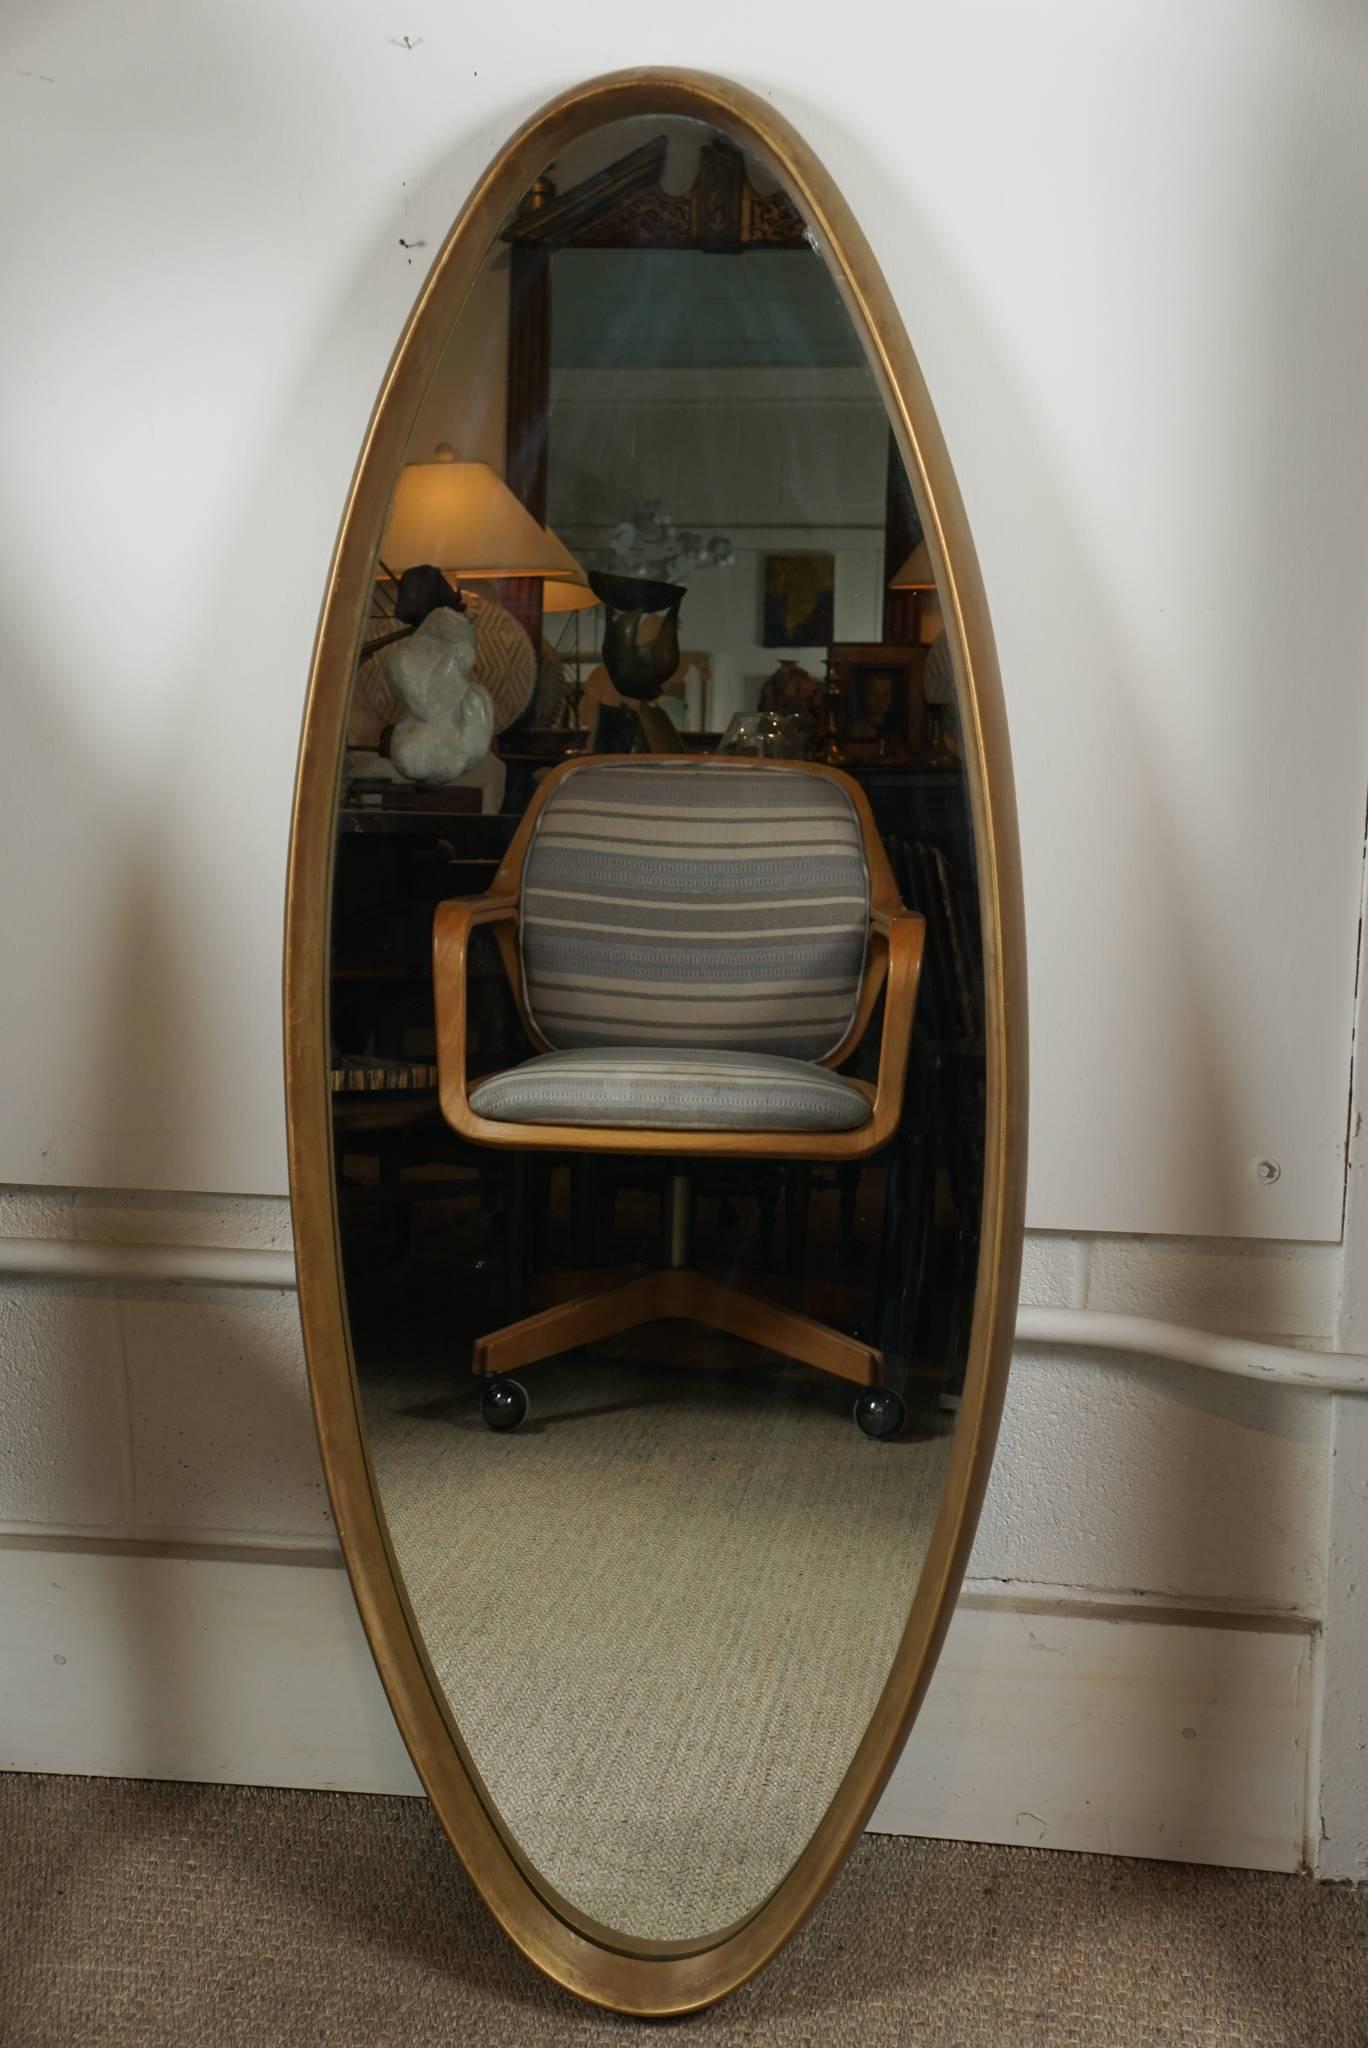 Here is a great oval mirror with a 2 inch deep inset frame in a painted gold finish.
The mirror is vintage with original painted finish and is in the style of La Barge.
There is a hard Masonite backing that is securely attached to the mirror.